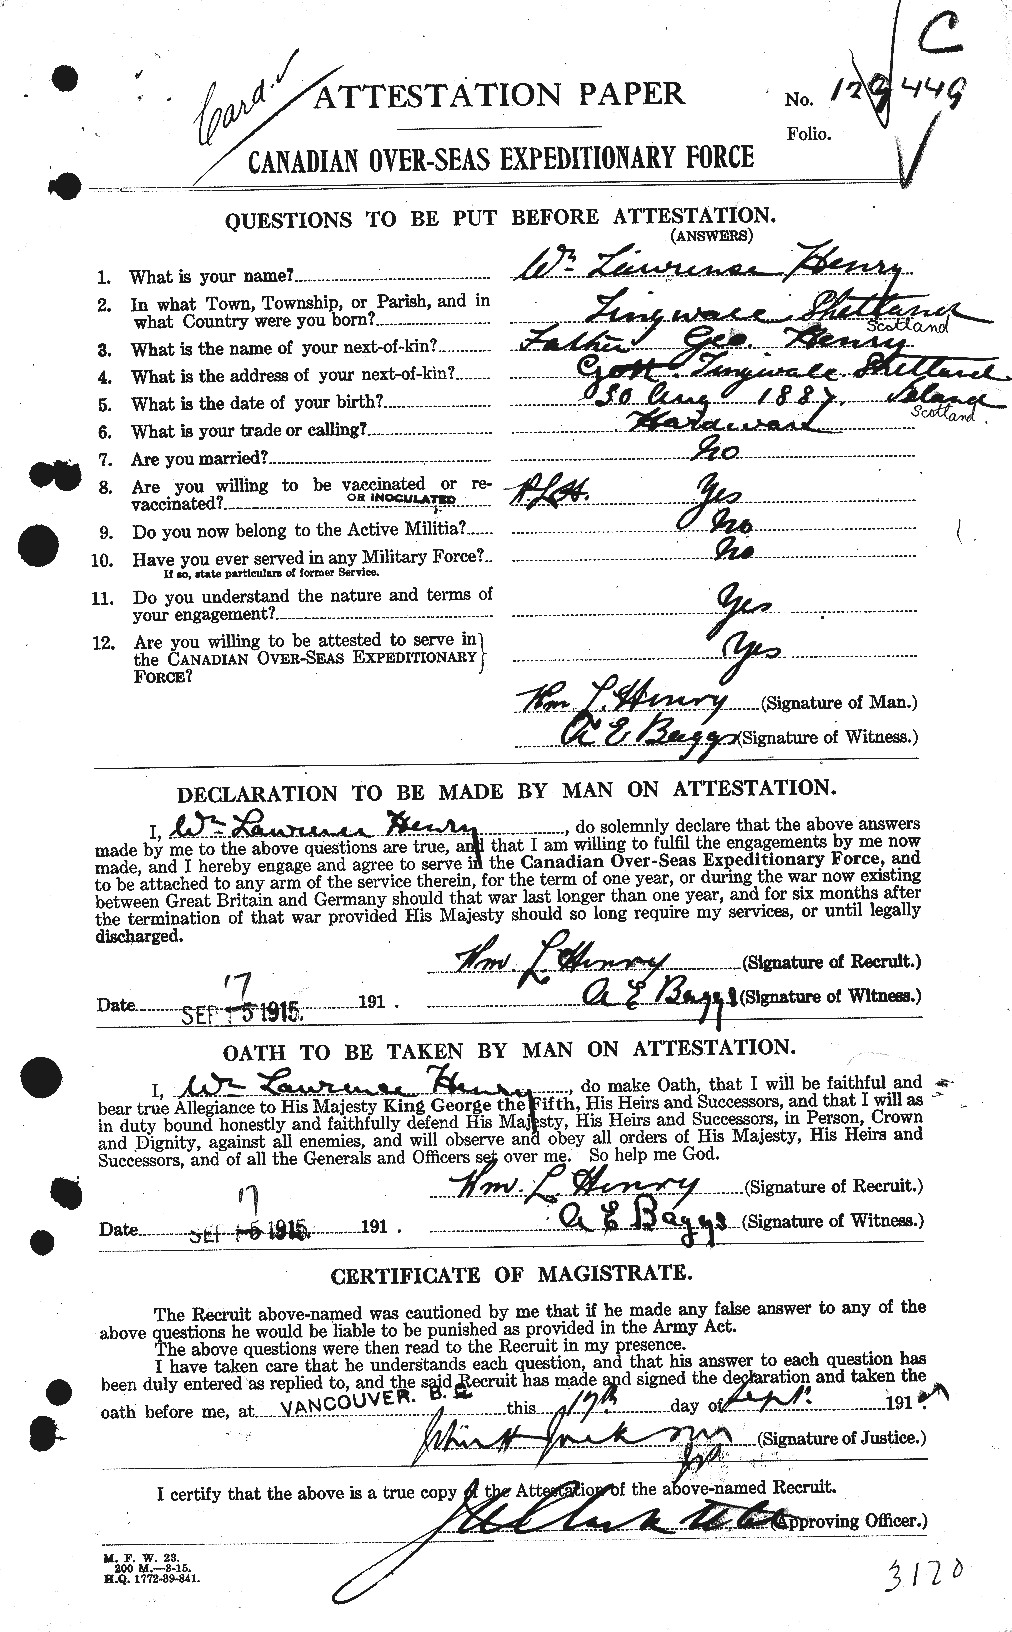 Personnel Records of the First World War - CEF 387789a